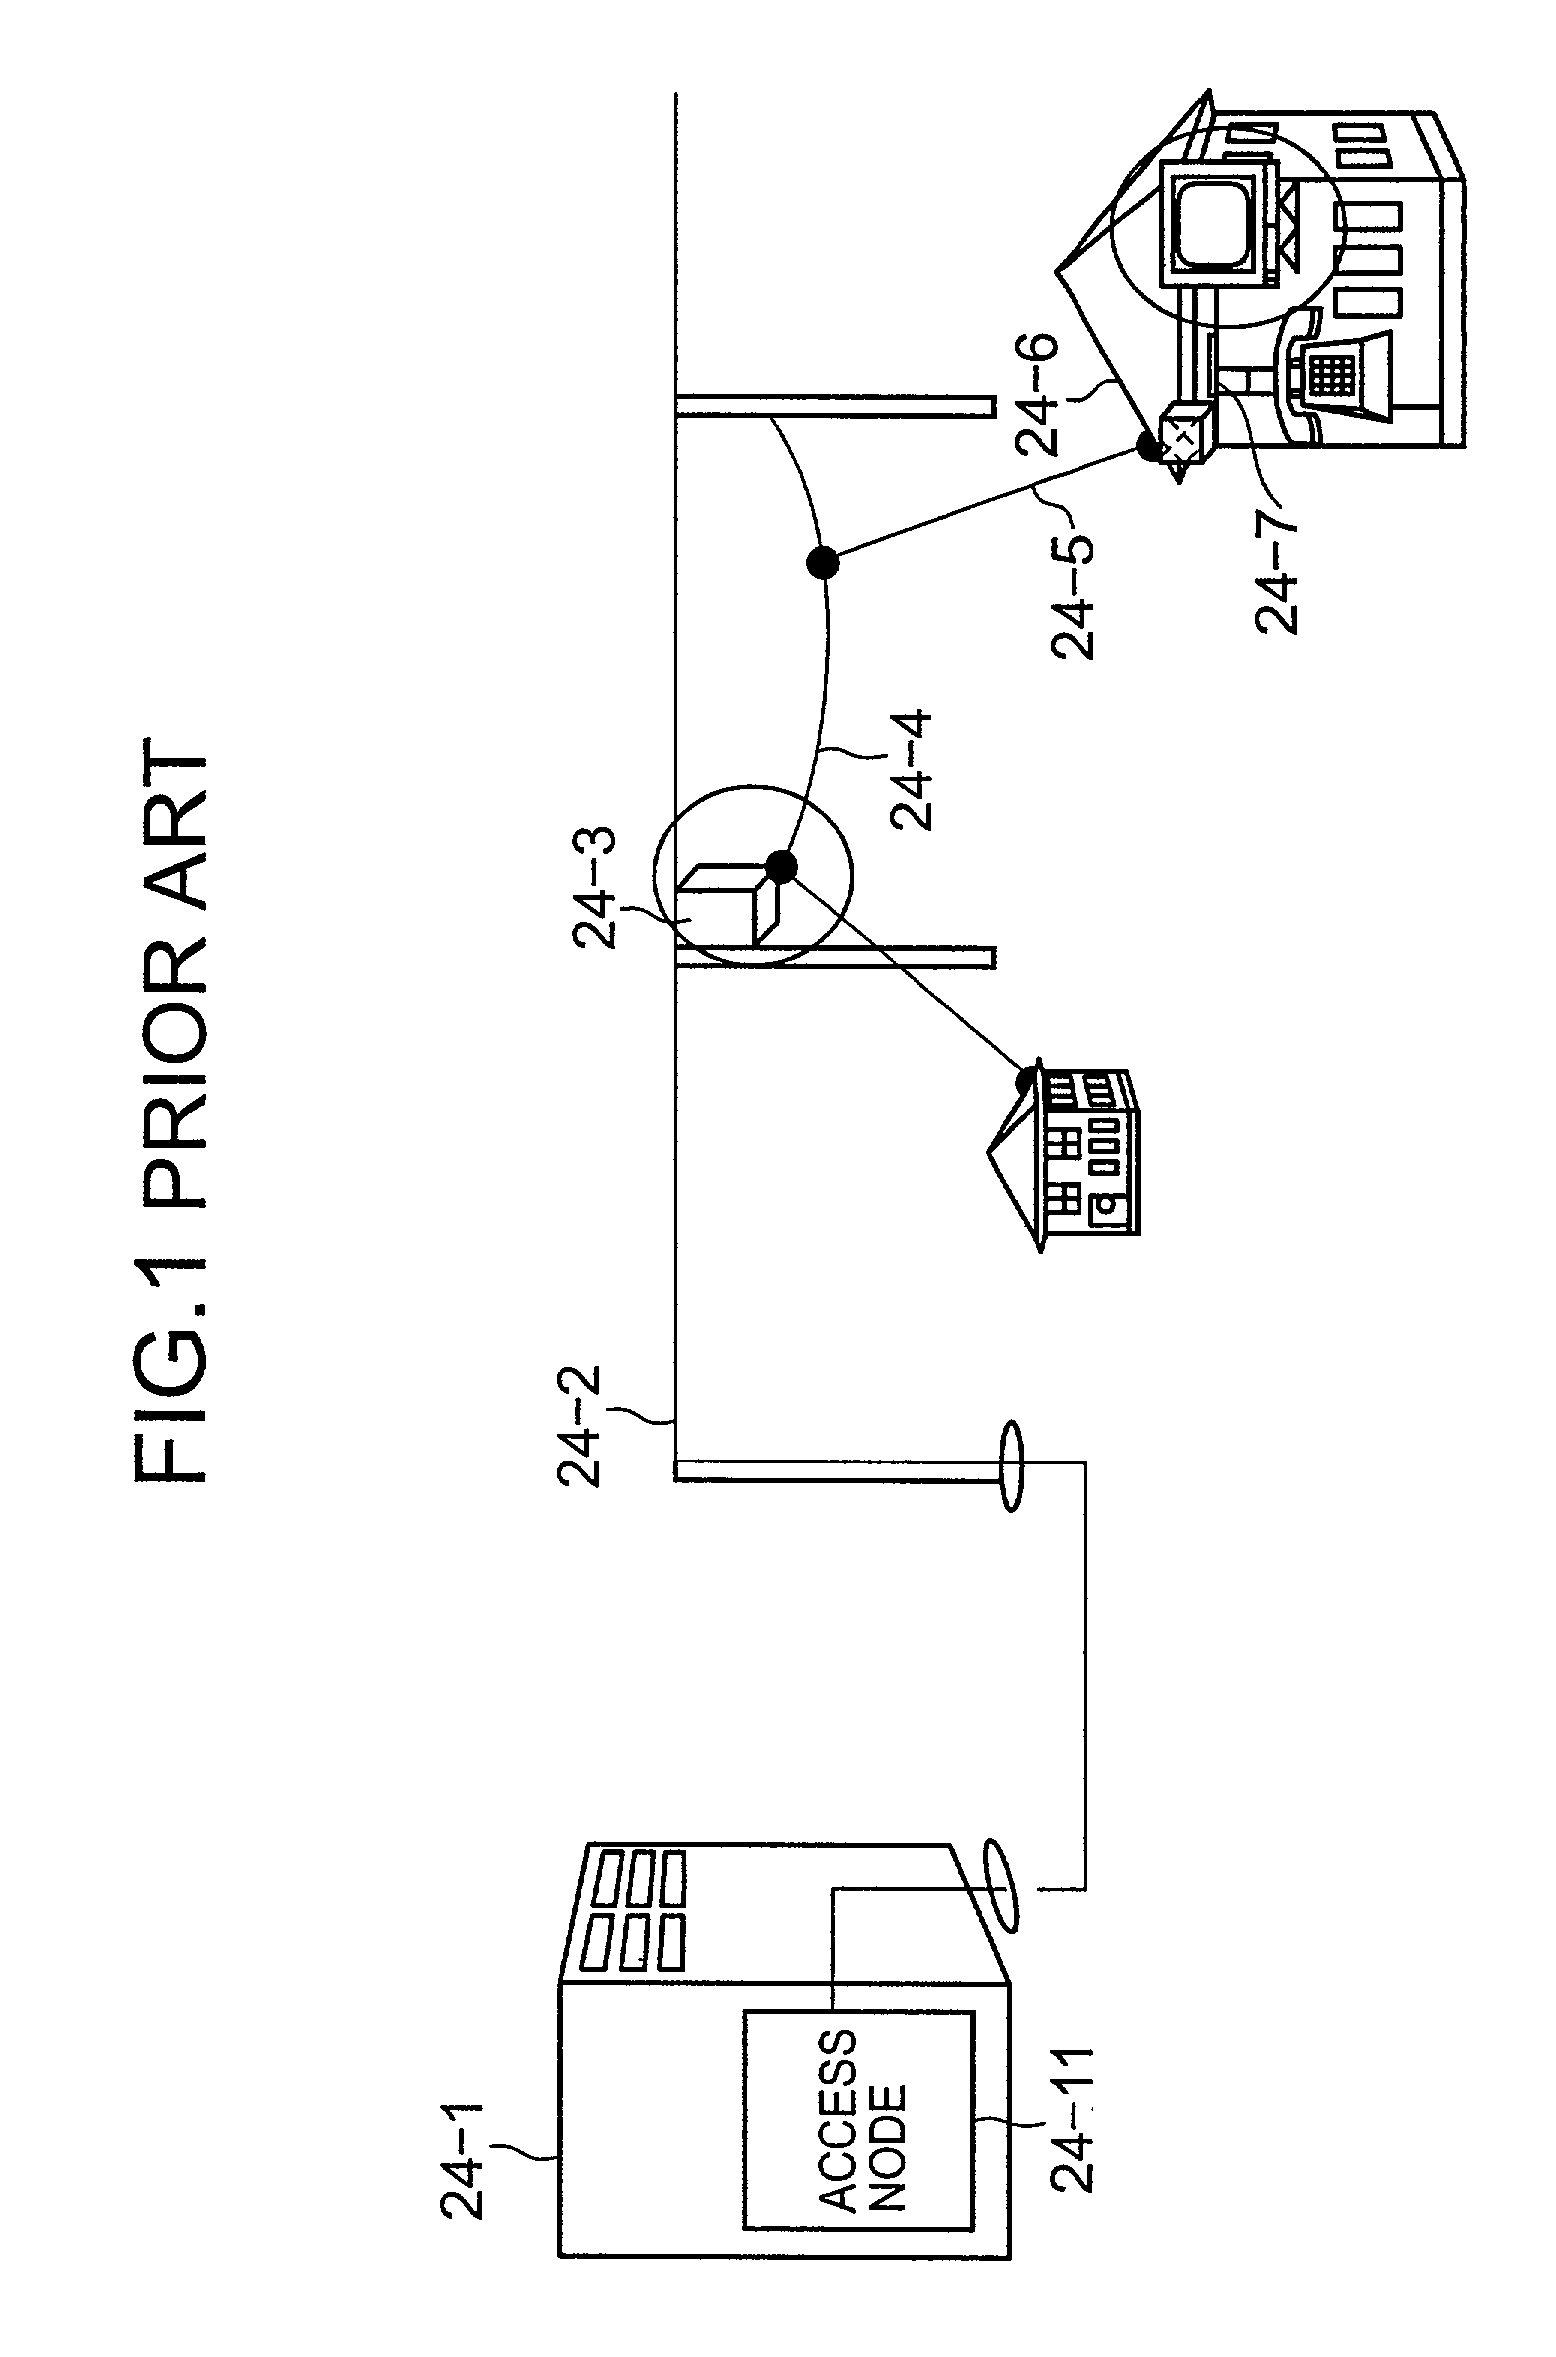 Noise canceling method and apparatus